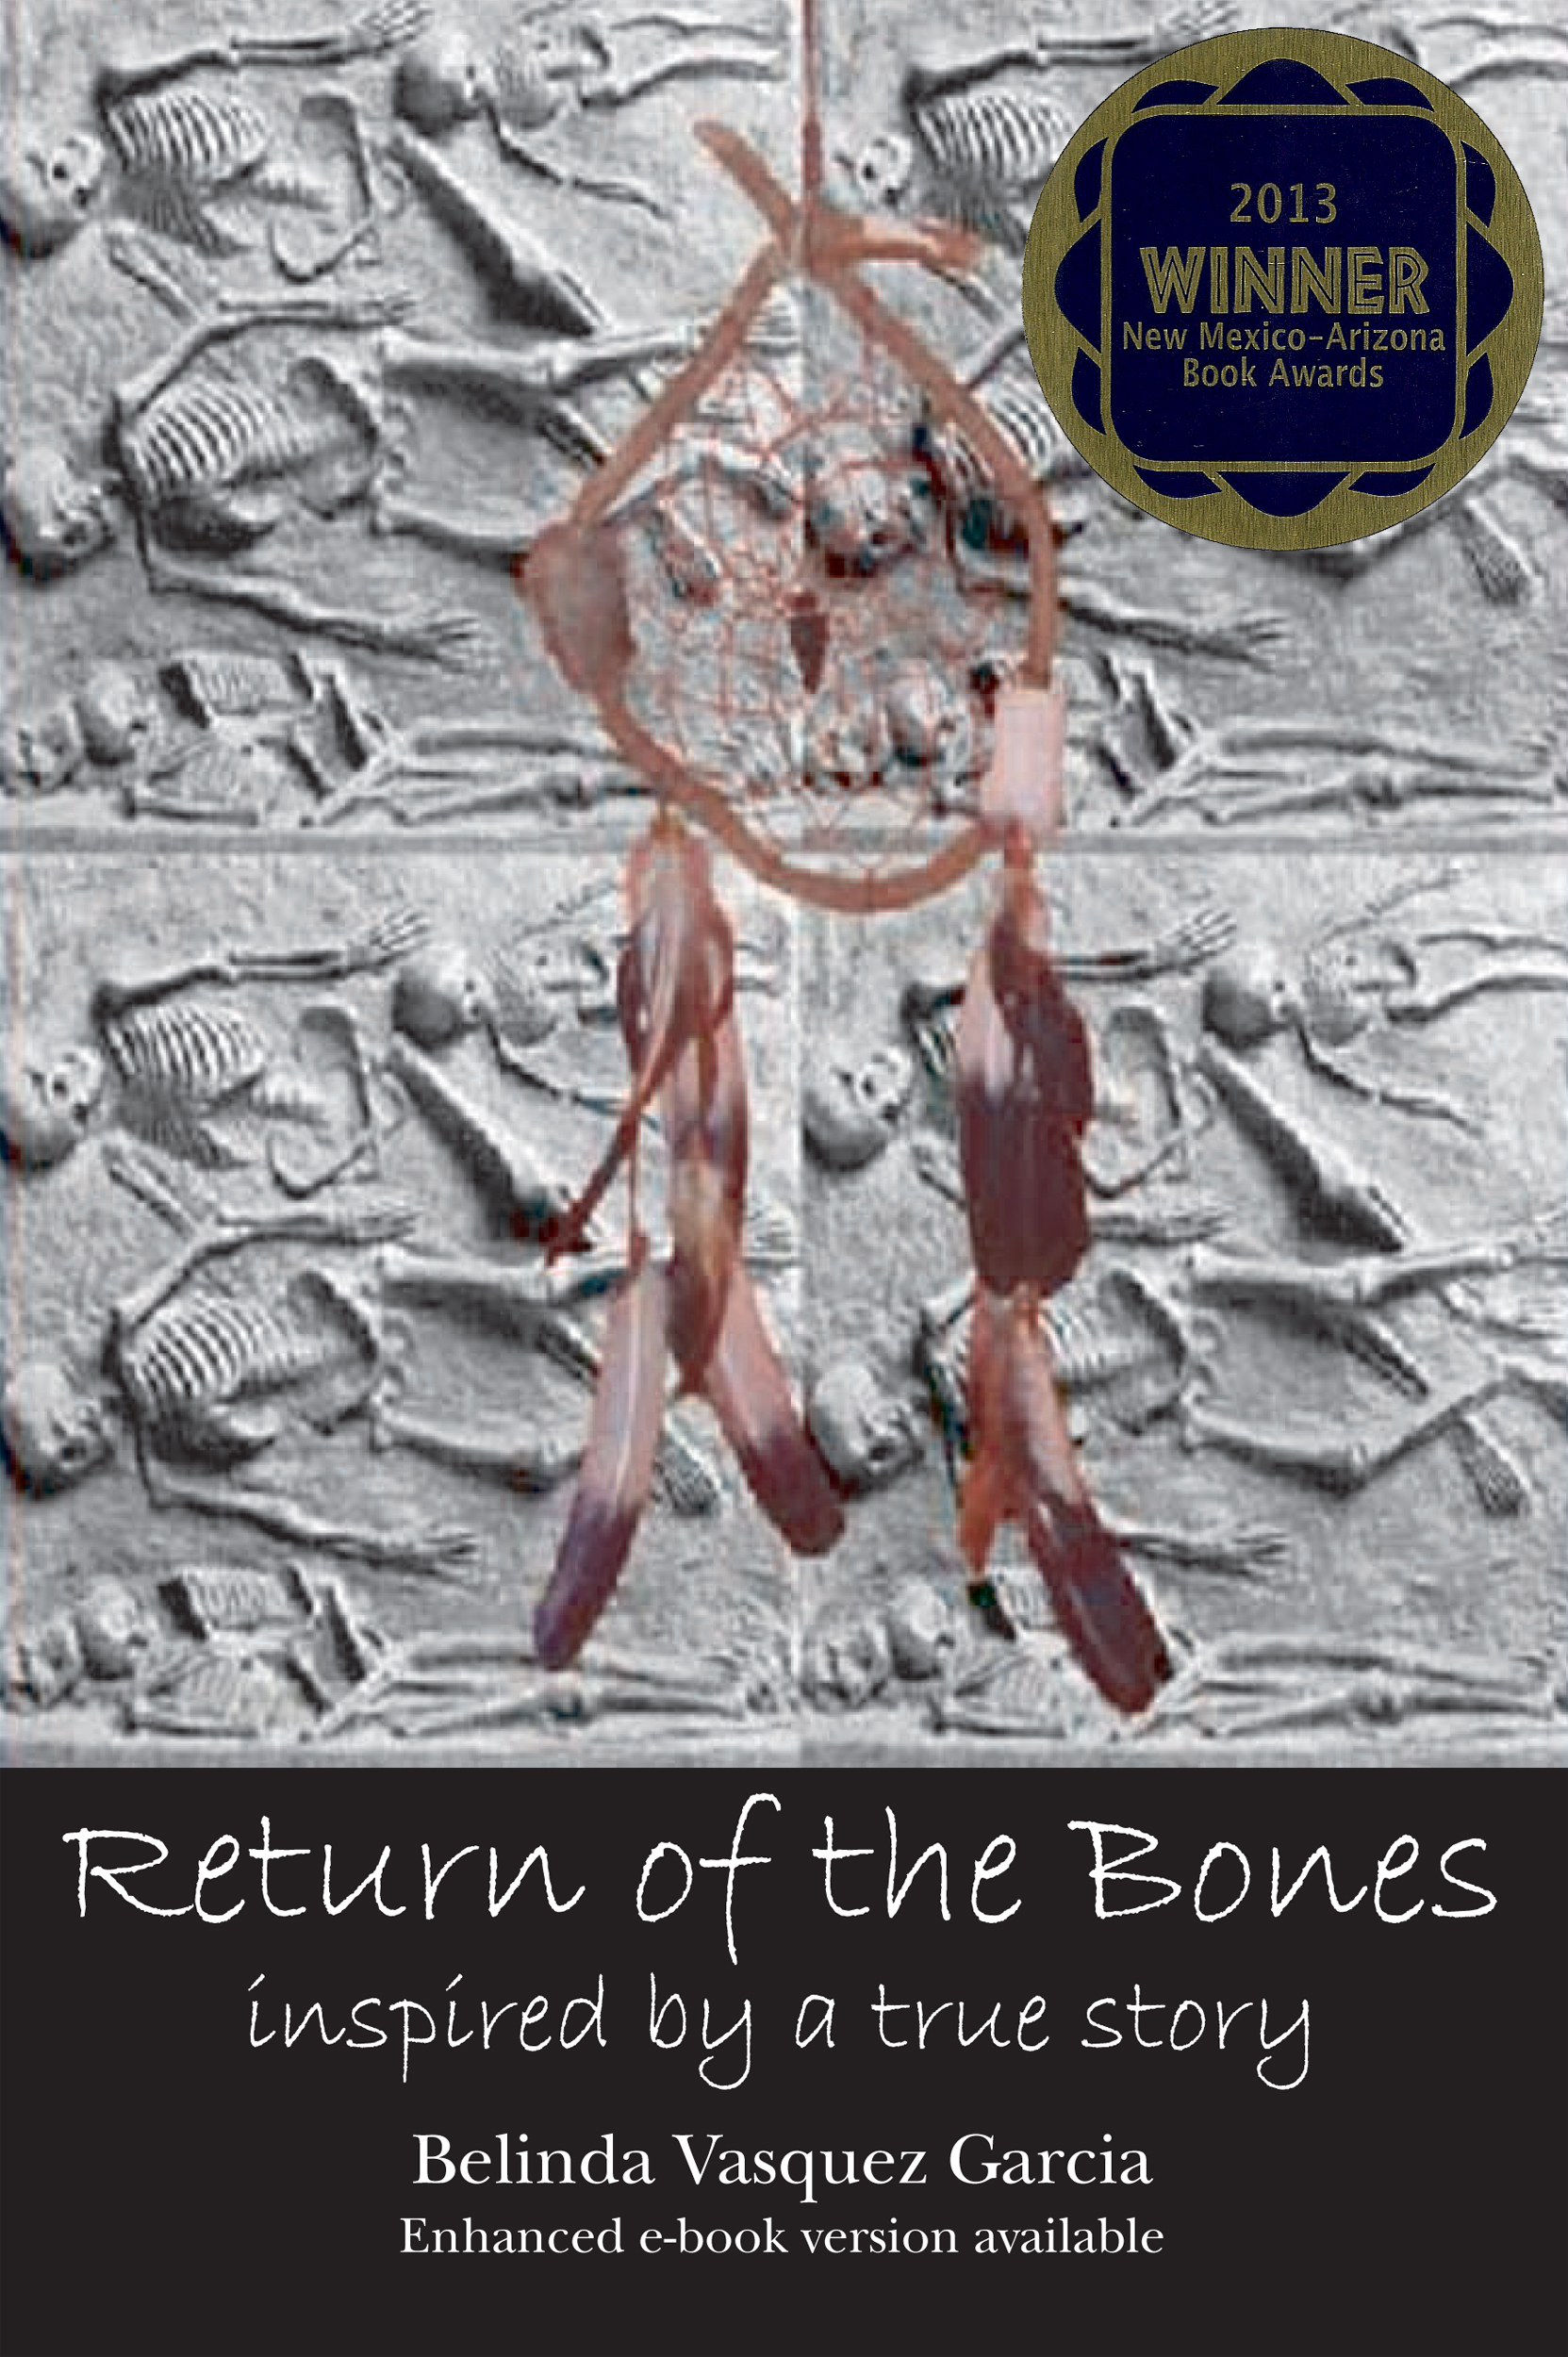 Return of the Bones, Inspired by a TRUE STORY